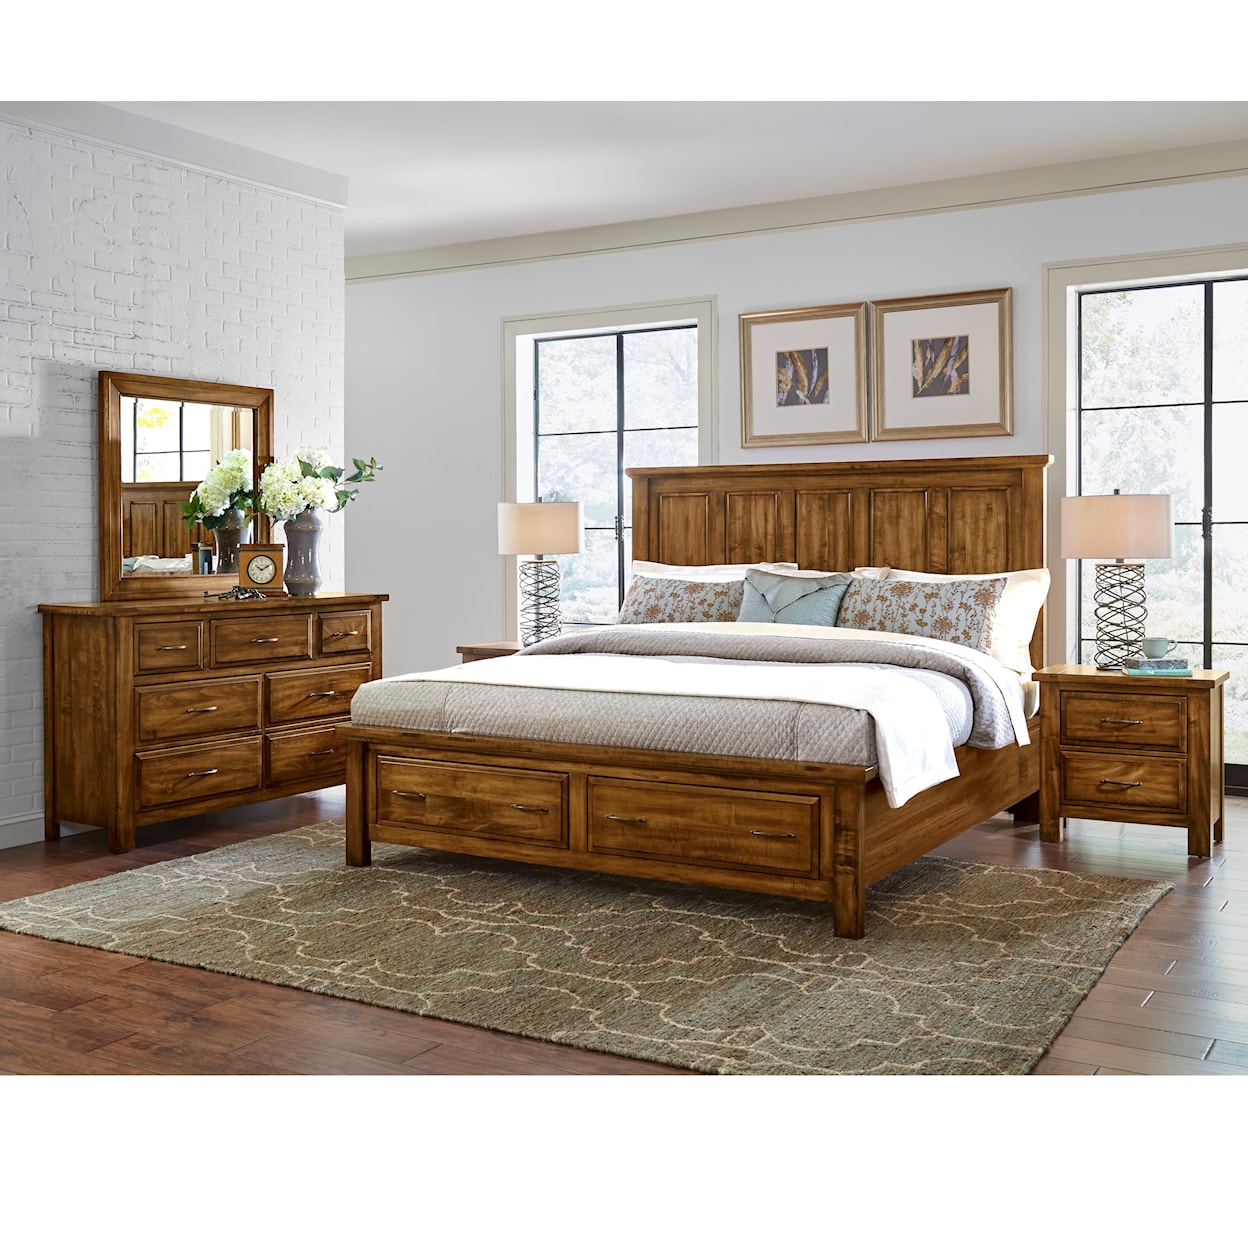 Virginia House Mt Airy King Slat Poster Storage Bed